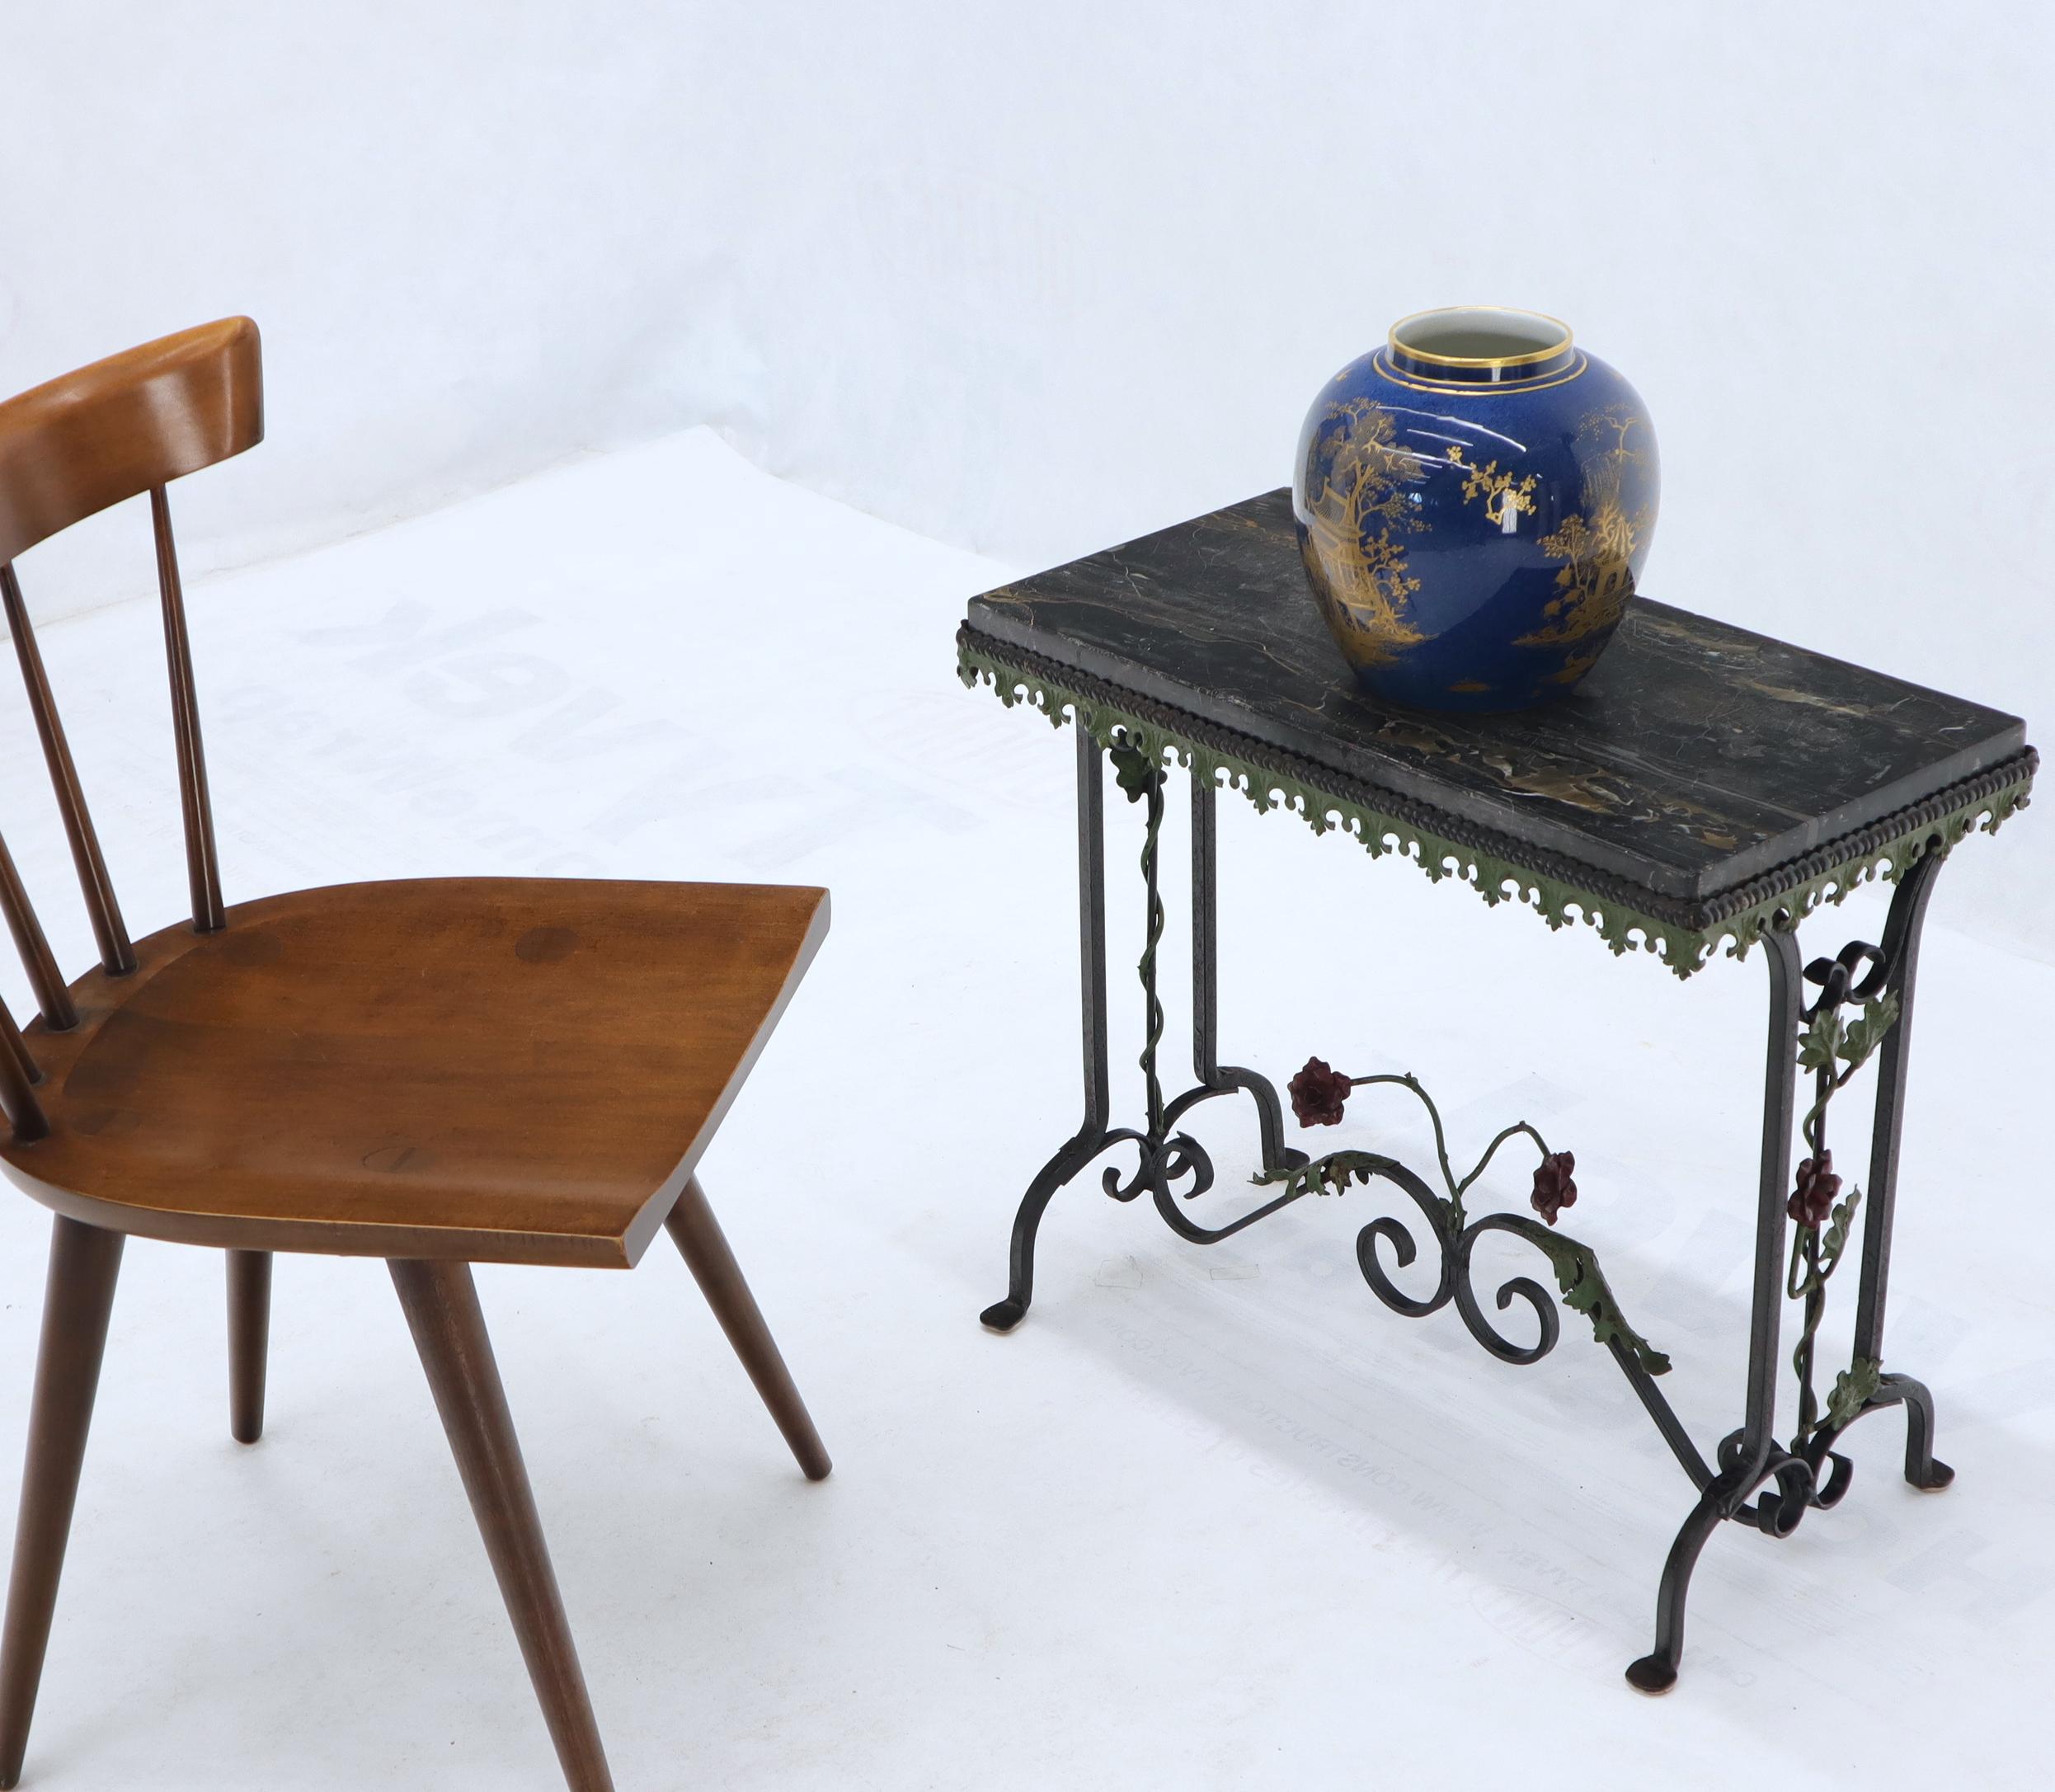 Wrought iron side table with thick black marble top. Decorated with forged metal roses.